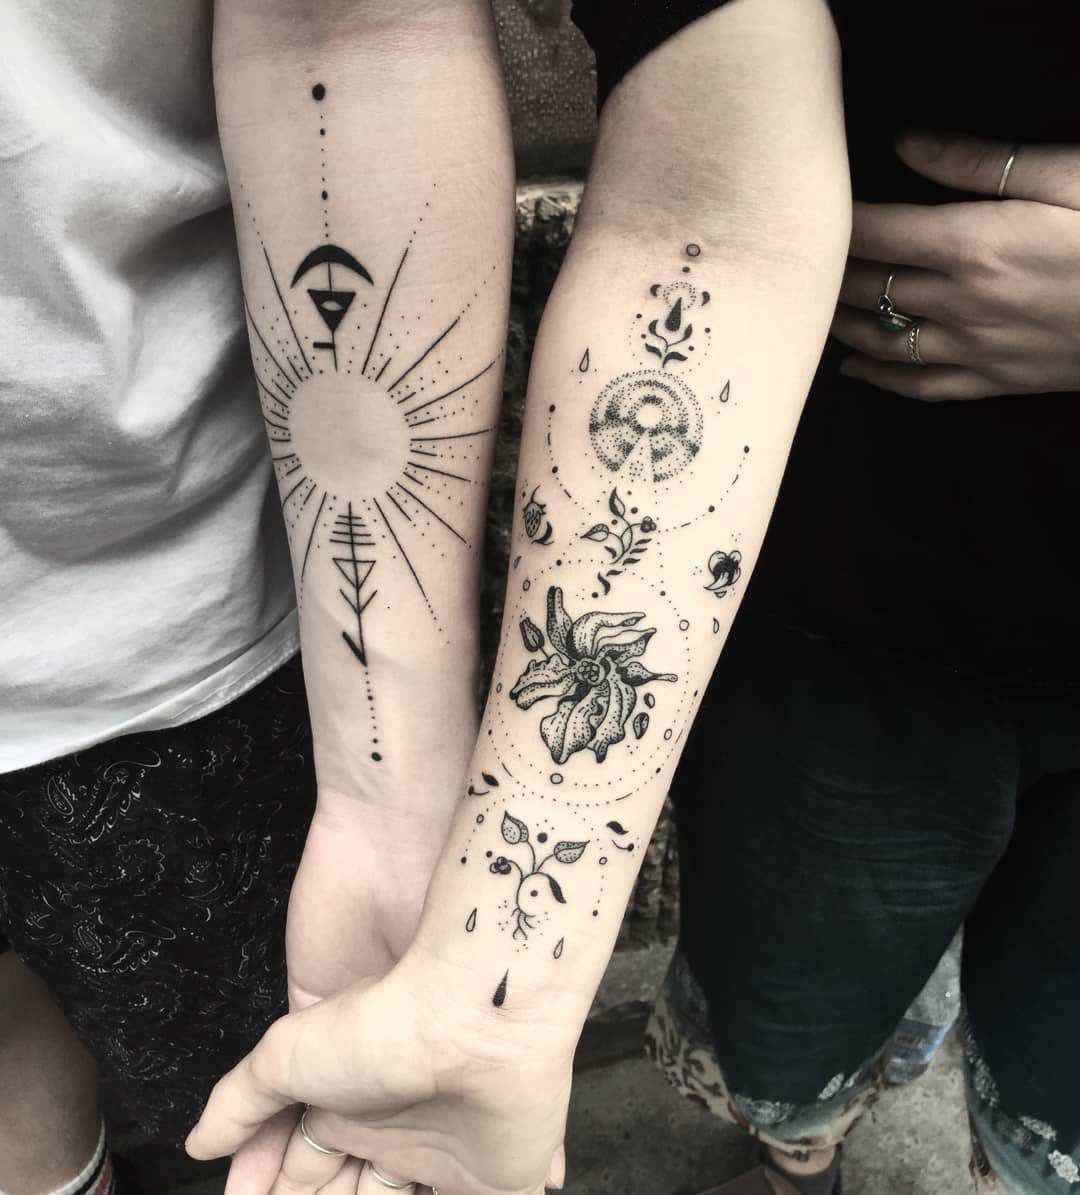 109 Hopelessly Romantic Couple Tattoos That Are Better Than A Ring |  Romantic couples tattoos, Matching couple tattoos, Meaningful tattoos for  couples